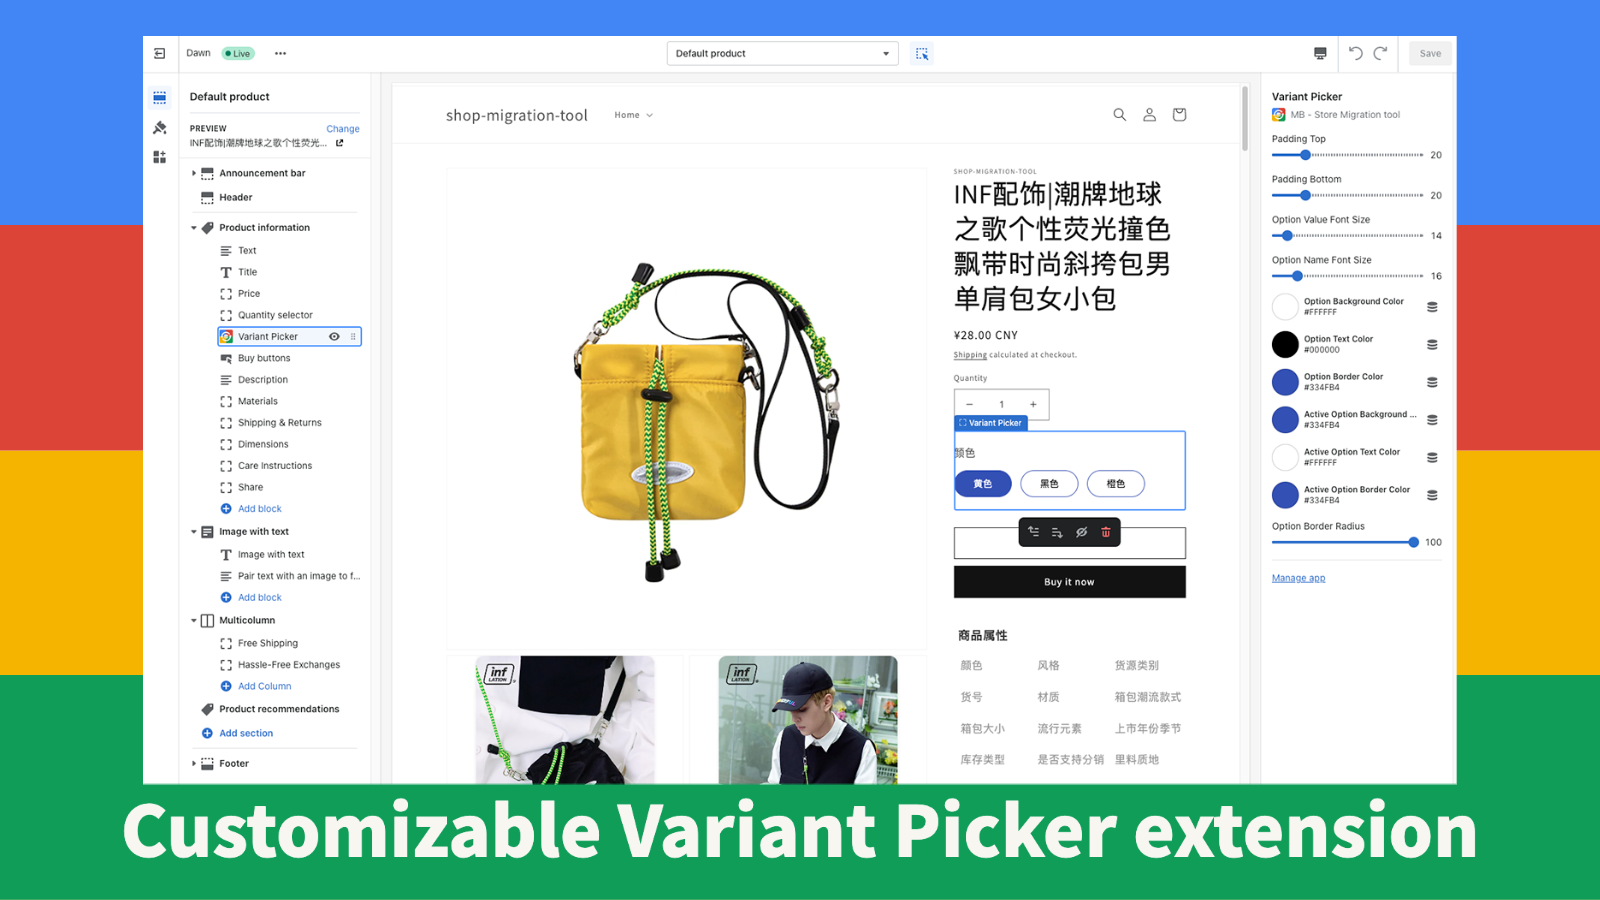 Customizable Variant Picker extension configuration